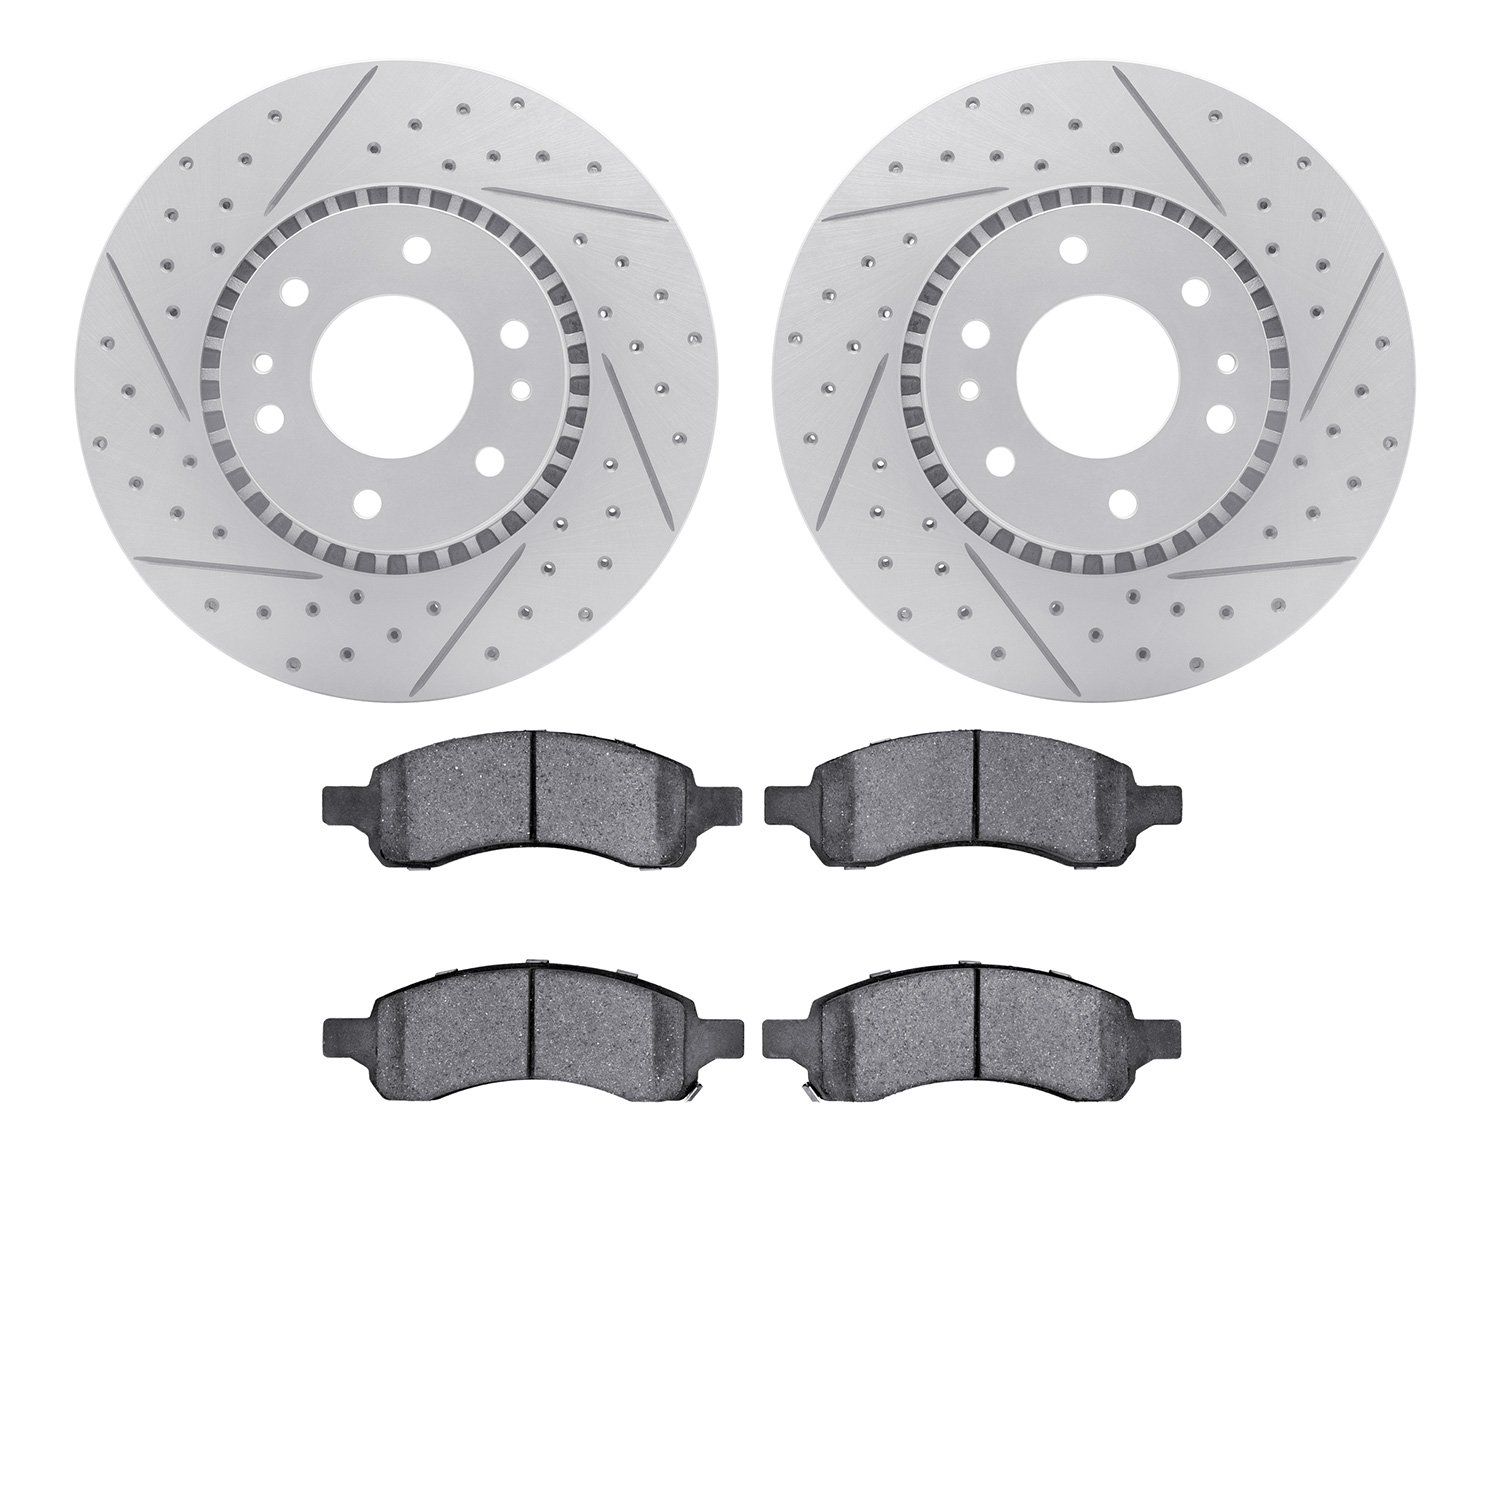 2602-48012 Geoperformance Drilled/Slotted Rotors w/5000 Euro Ceramic Brake Pads Kit, 2006-2009 GM, Position: Front